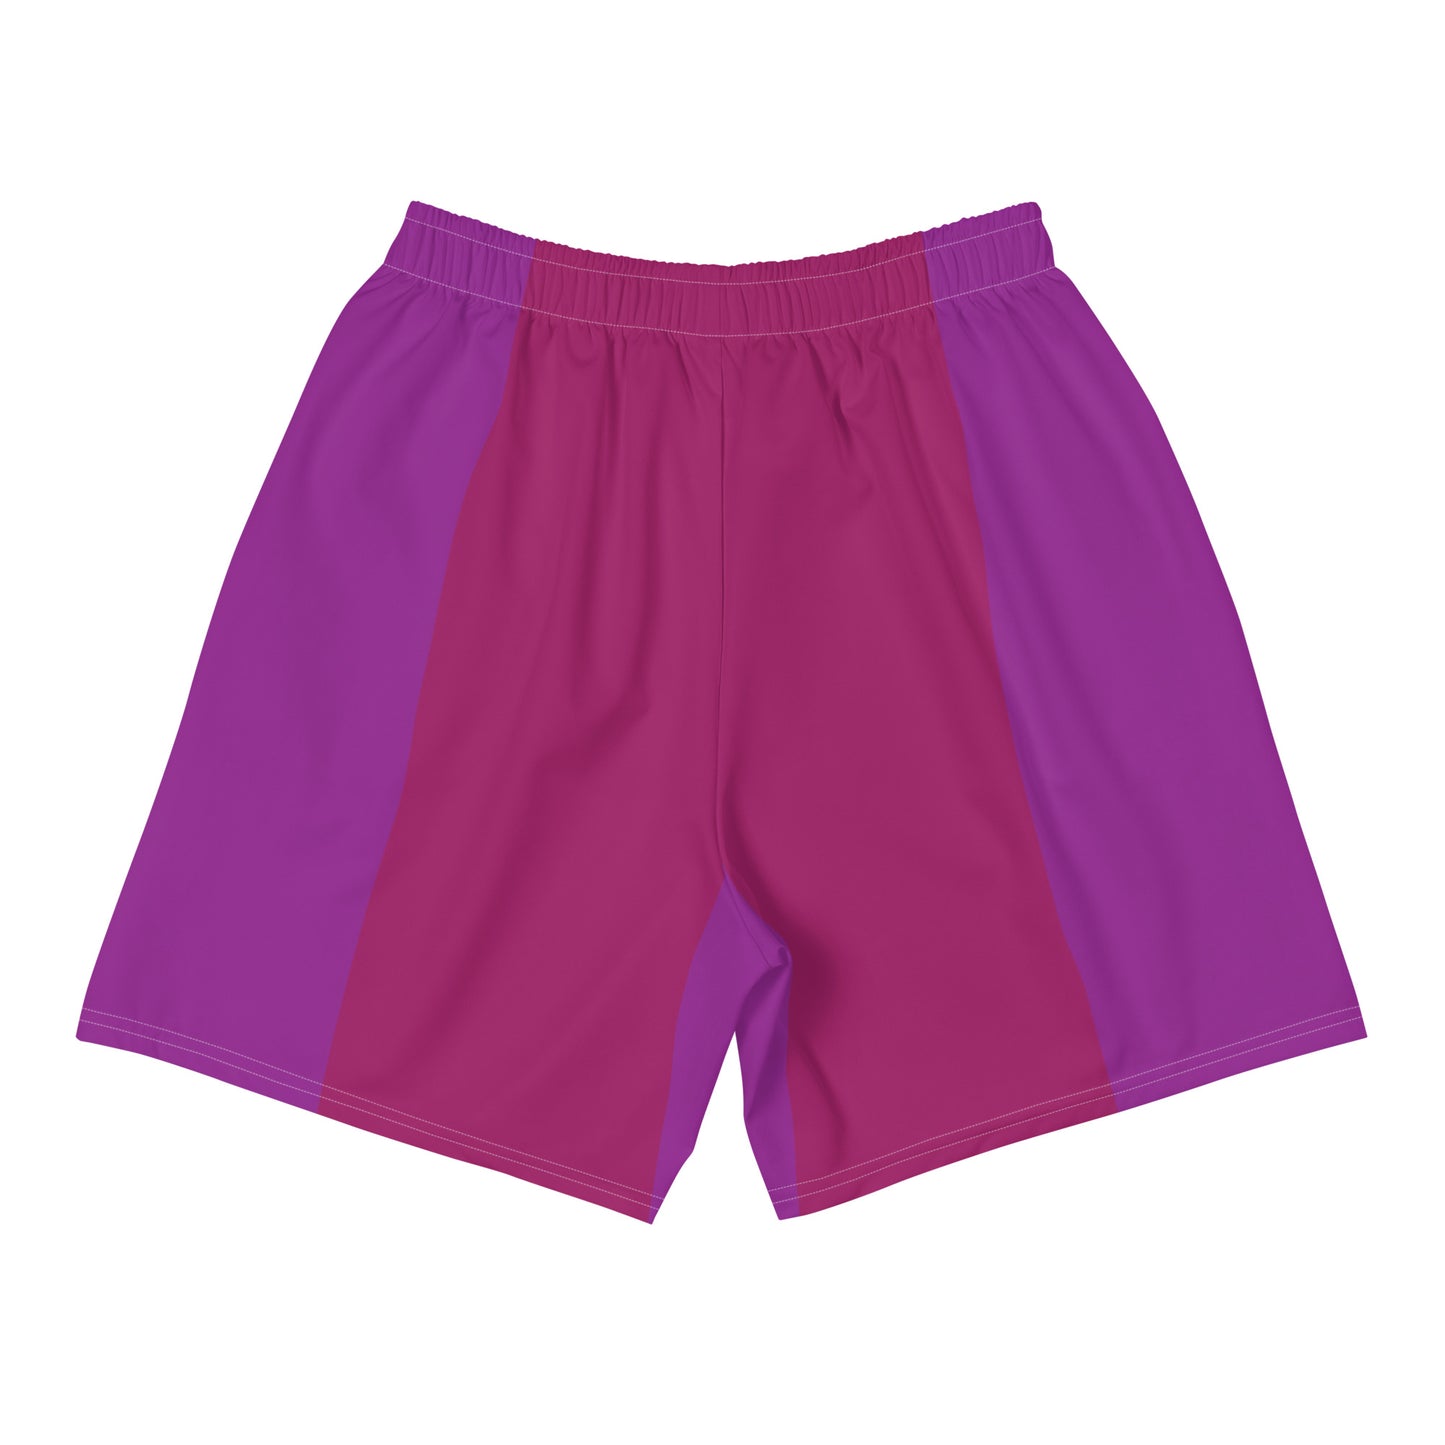 Purple Pink - Sustainably Made Men's Short